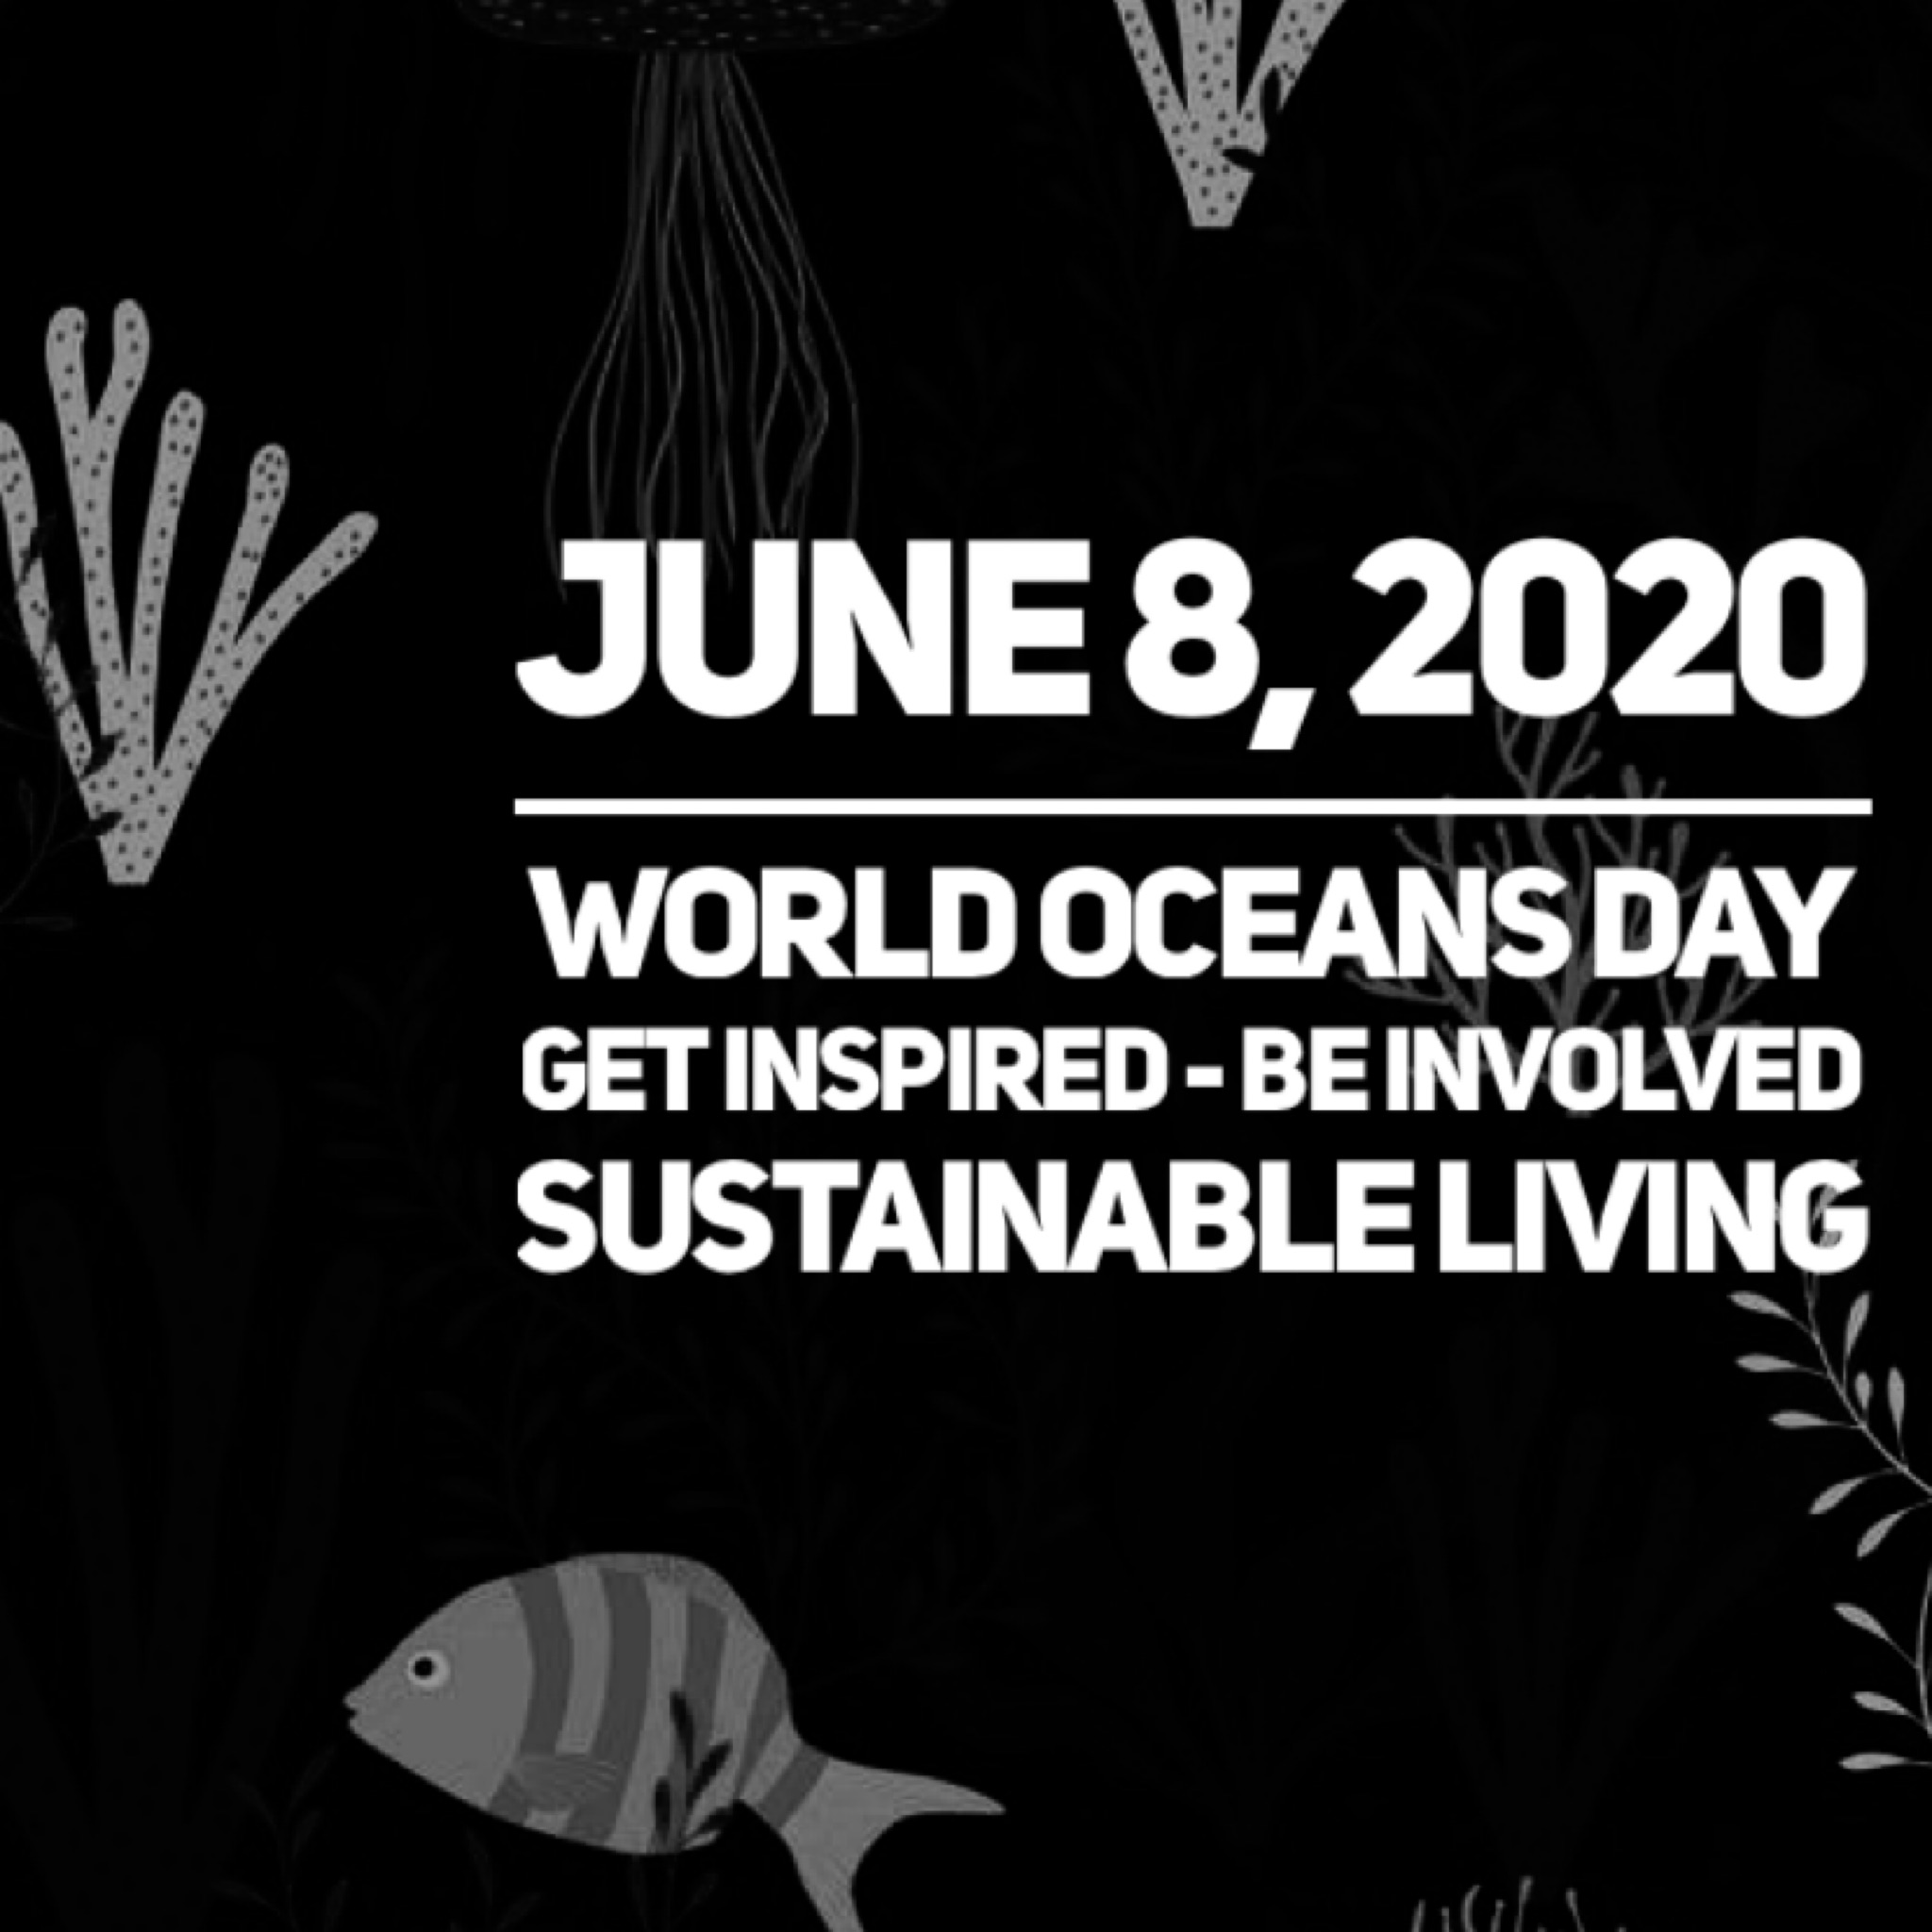 World Oceans DAY SHOP AT BIG LIVE WORLD PLASTIC FREE ITEMS